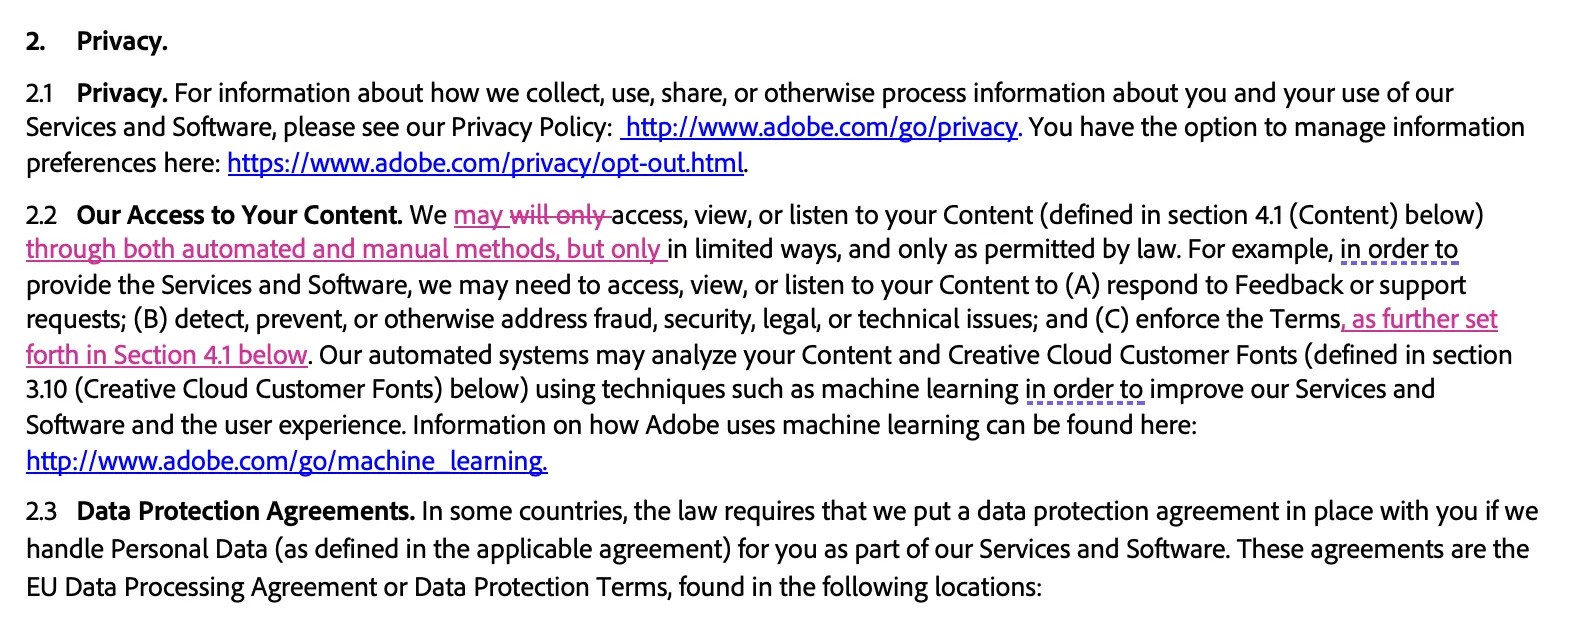 Adobe terms and conditions: 2. Privacy.2.1 Privacy. For information about how we collect, use, share, or otherwise process information about you and your use of our Services and Software, please see our Privacy Policy: http://www.adobe.com/go/privacy. You have the option to manage i information preferences here: https://www.adobe.com/privacy/opt-out.html. 2.2 Our Access to Your Content. We may will only access, view, or listen to your Content (defined in section 4.1 (Content) below) through both automated and manual methods, but only in limited ways, and only as permitted by law. For example, in order to provide the Services and Software, we may need to access, view, or listen to your Content to (A) respond to Feedback or support requests; (B) detect, prevent, or otherwise address fraud, security, legal, or technical issues; and (C) enforce the Terms, as further set forth in Section 4.1 below. Our automated systems may analyze your Content and Creative Cloud Customer Fonts (defined in section 3.10 (Creative Cloud Customer Fonts) below) using techniques such as machine learning in order to improve our Services and Software and the user experience. Information on how Adobe uses machine learning can be found here: http://www.adobe.com/go/machine learning. 2.3 Data Protection Agreements. In some countries, the law requires that we put a data protection agreement in place with you if we handle Personal Data (as defined in the applicable agreement) for you as part of our Services and Software. These agreements are the EU Data Processing Agreement or Data Protection Terms, found in the following locations.